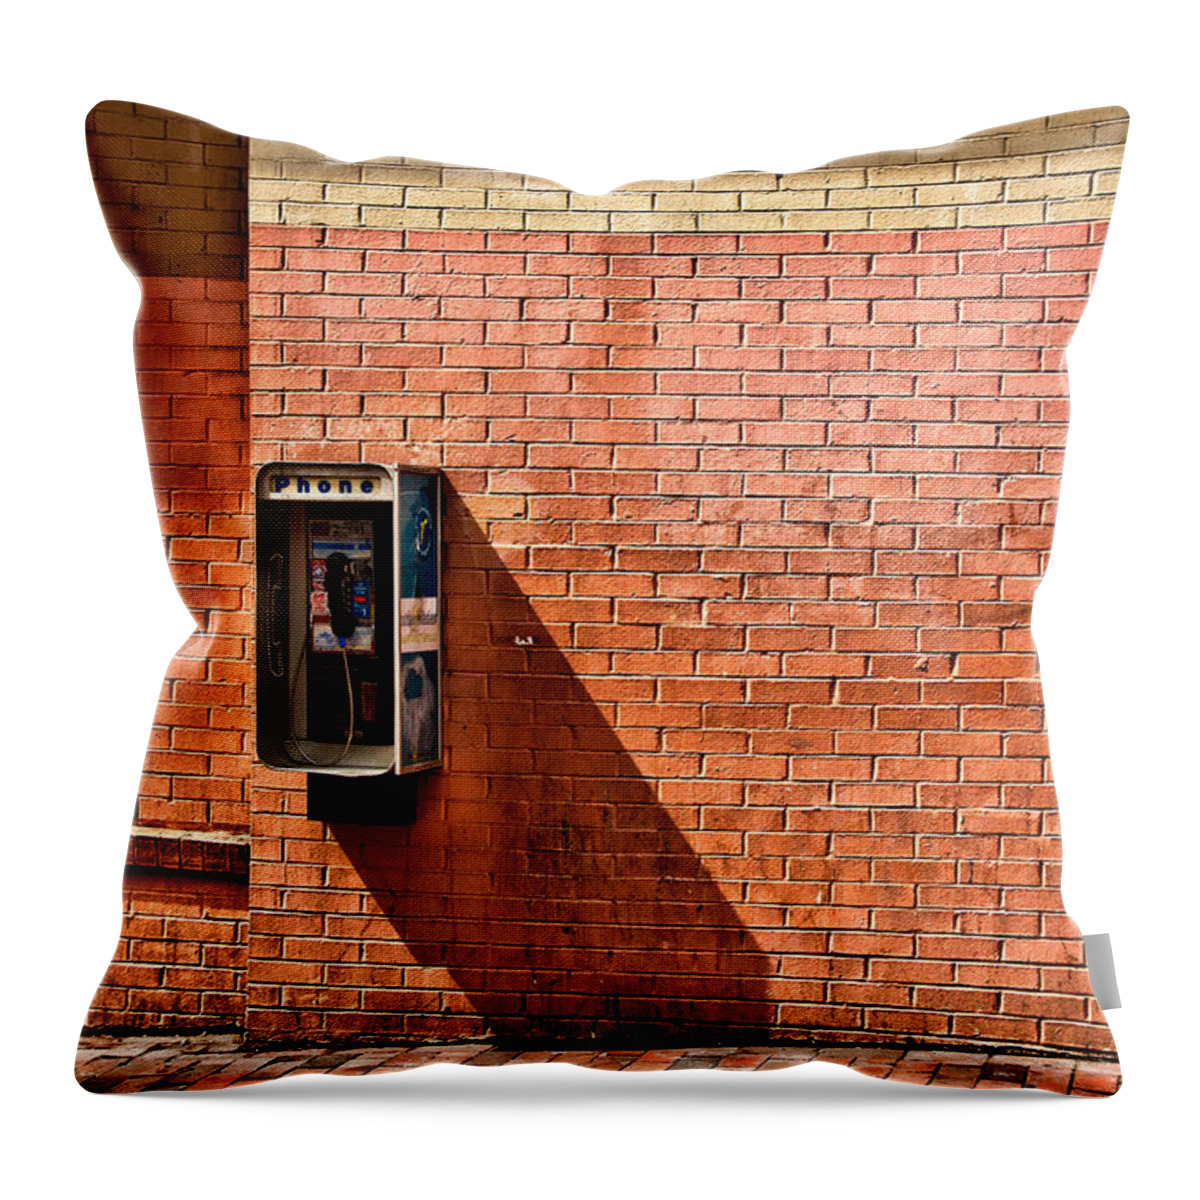 Phone Throw Pillow featuring the photograph Call Me by Christopher Holmes